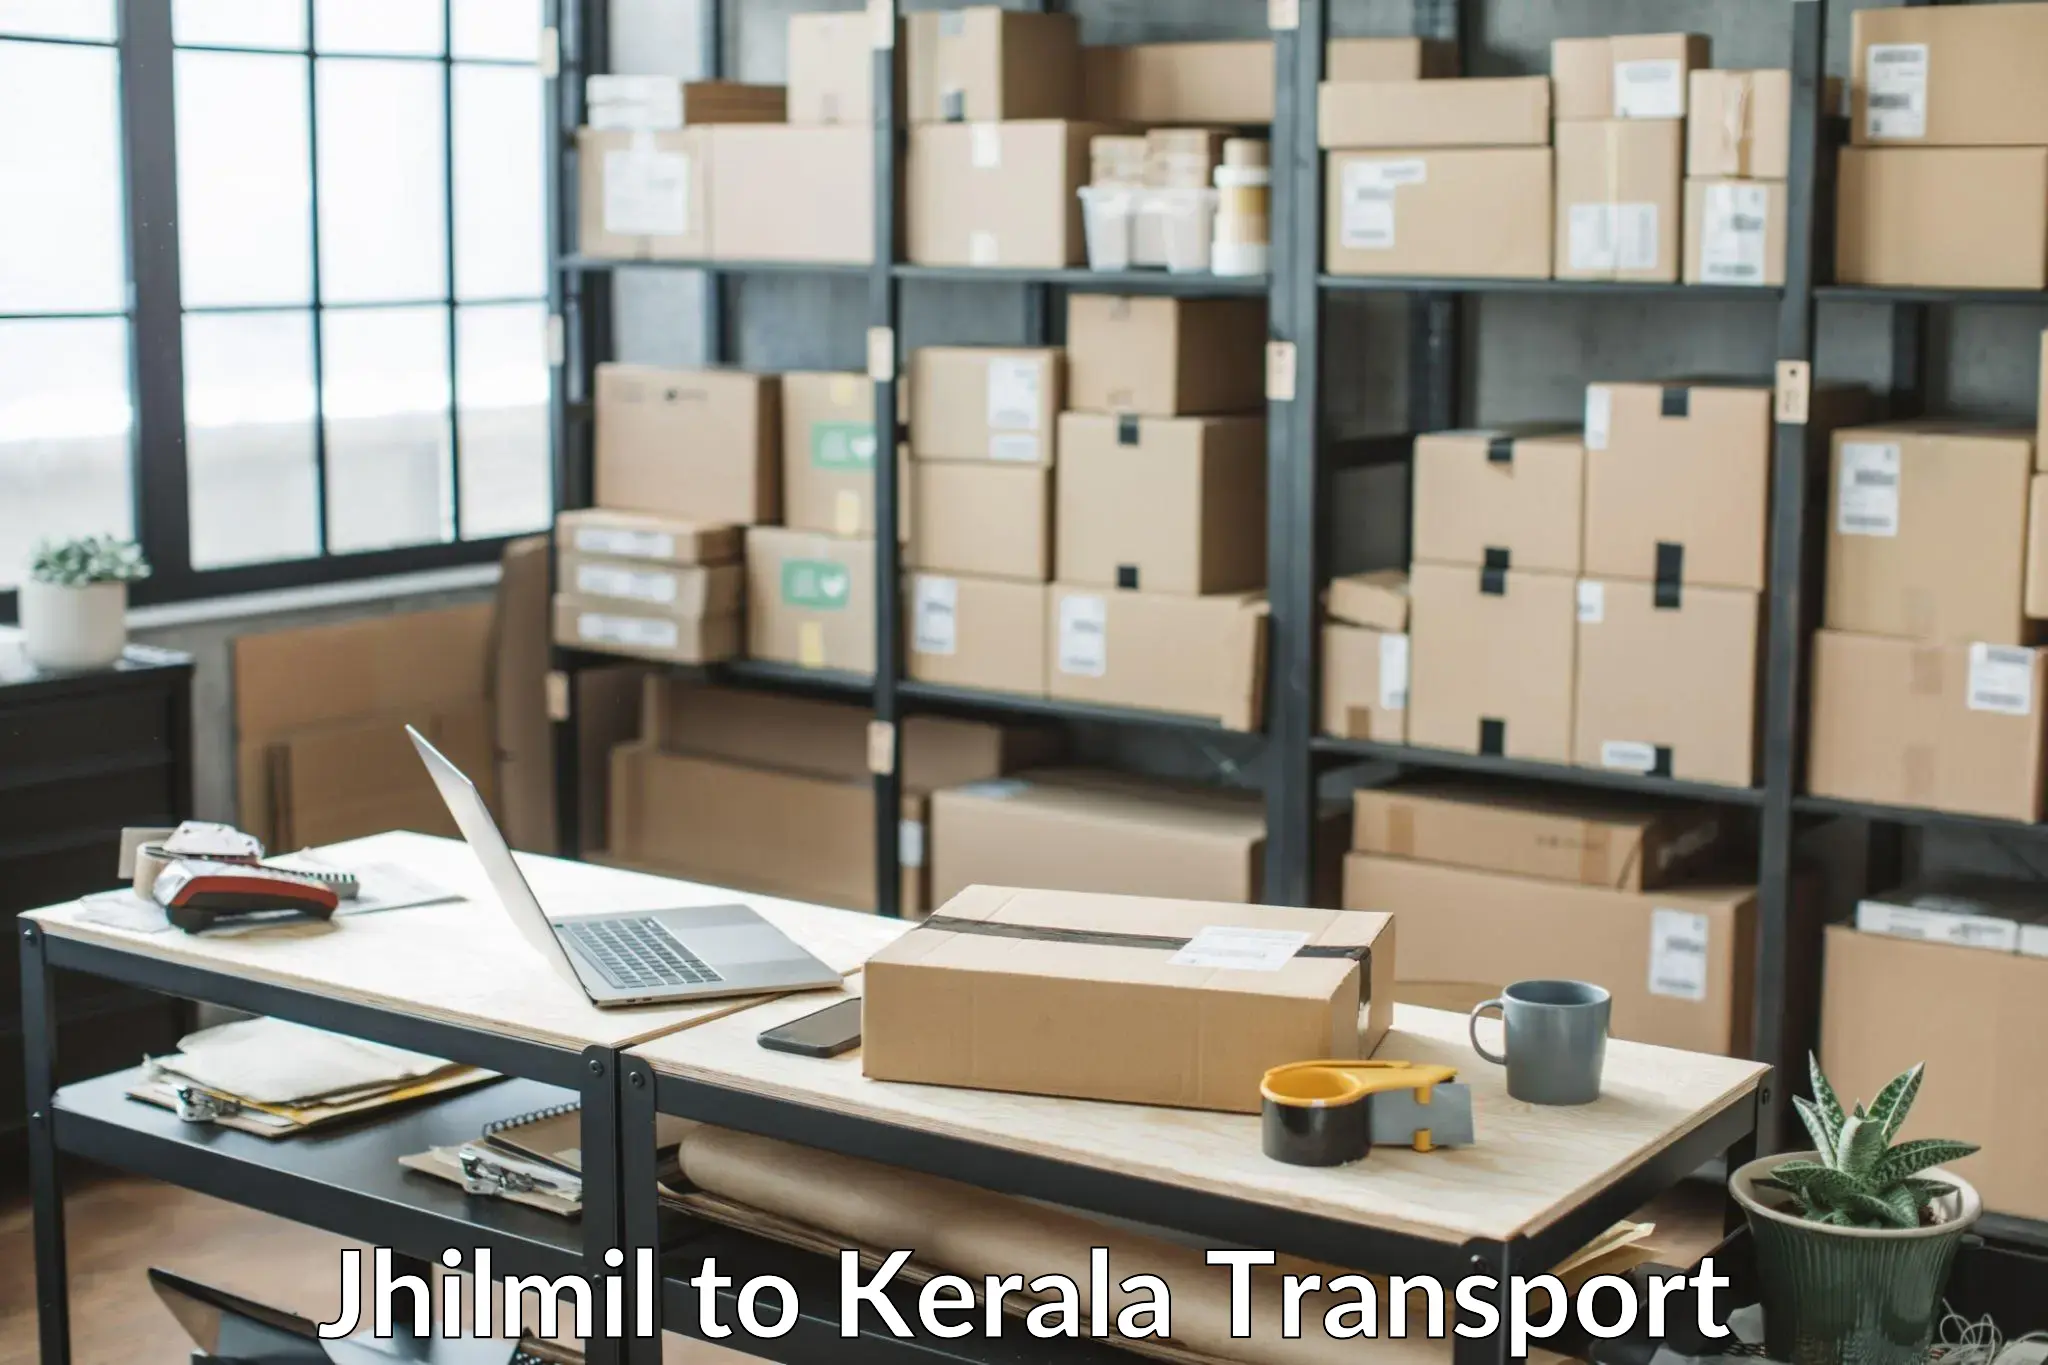 Road transport online services Jhilmil to Kochi